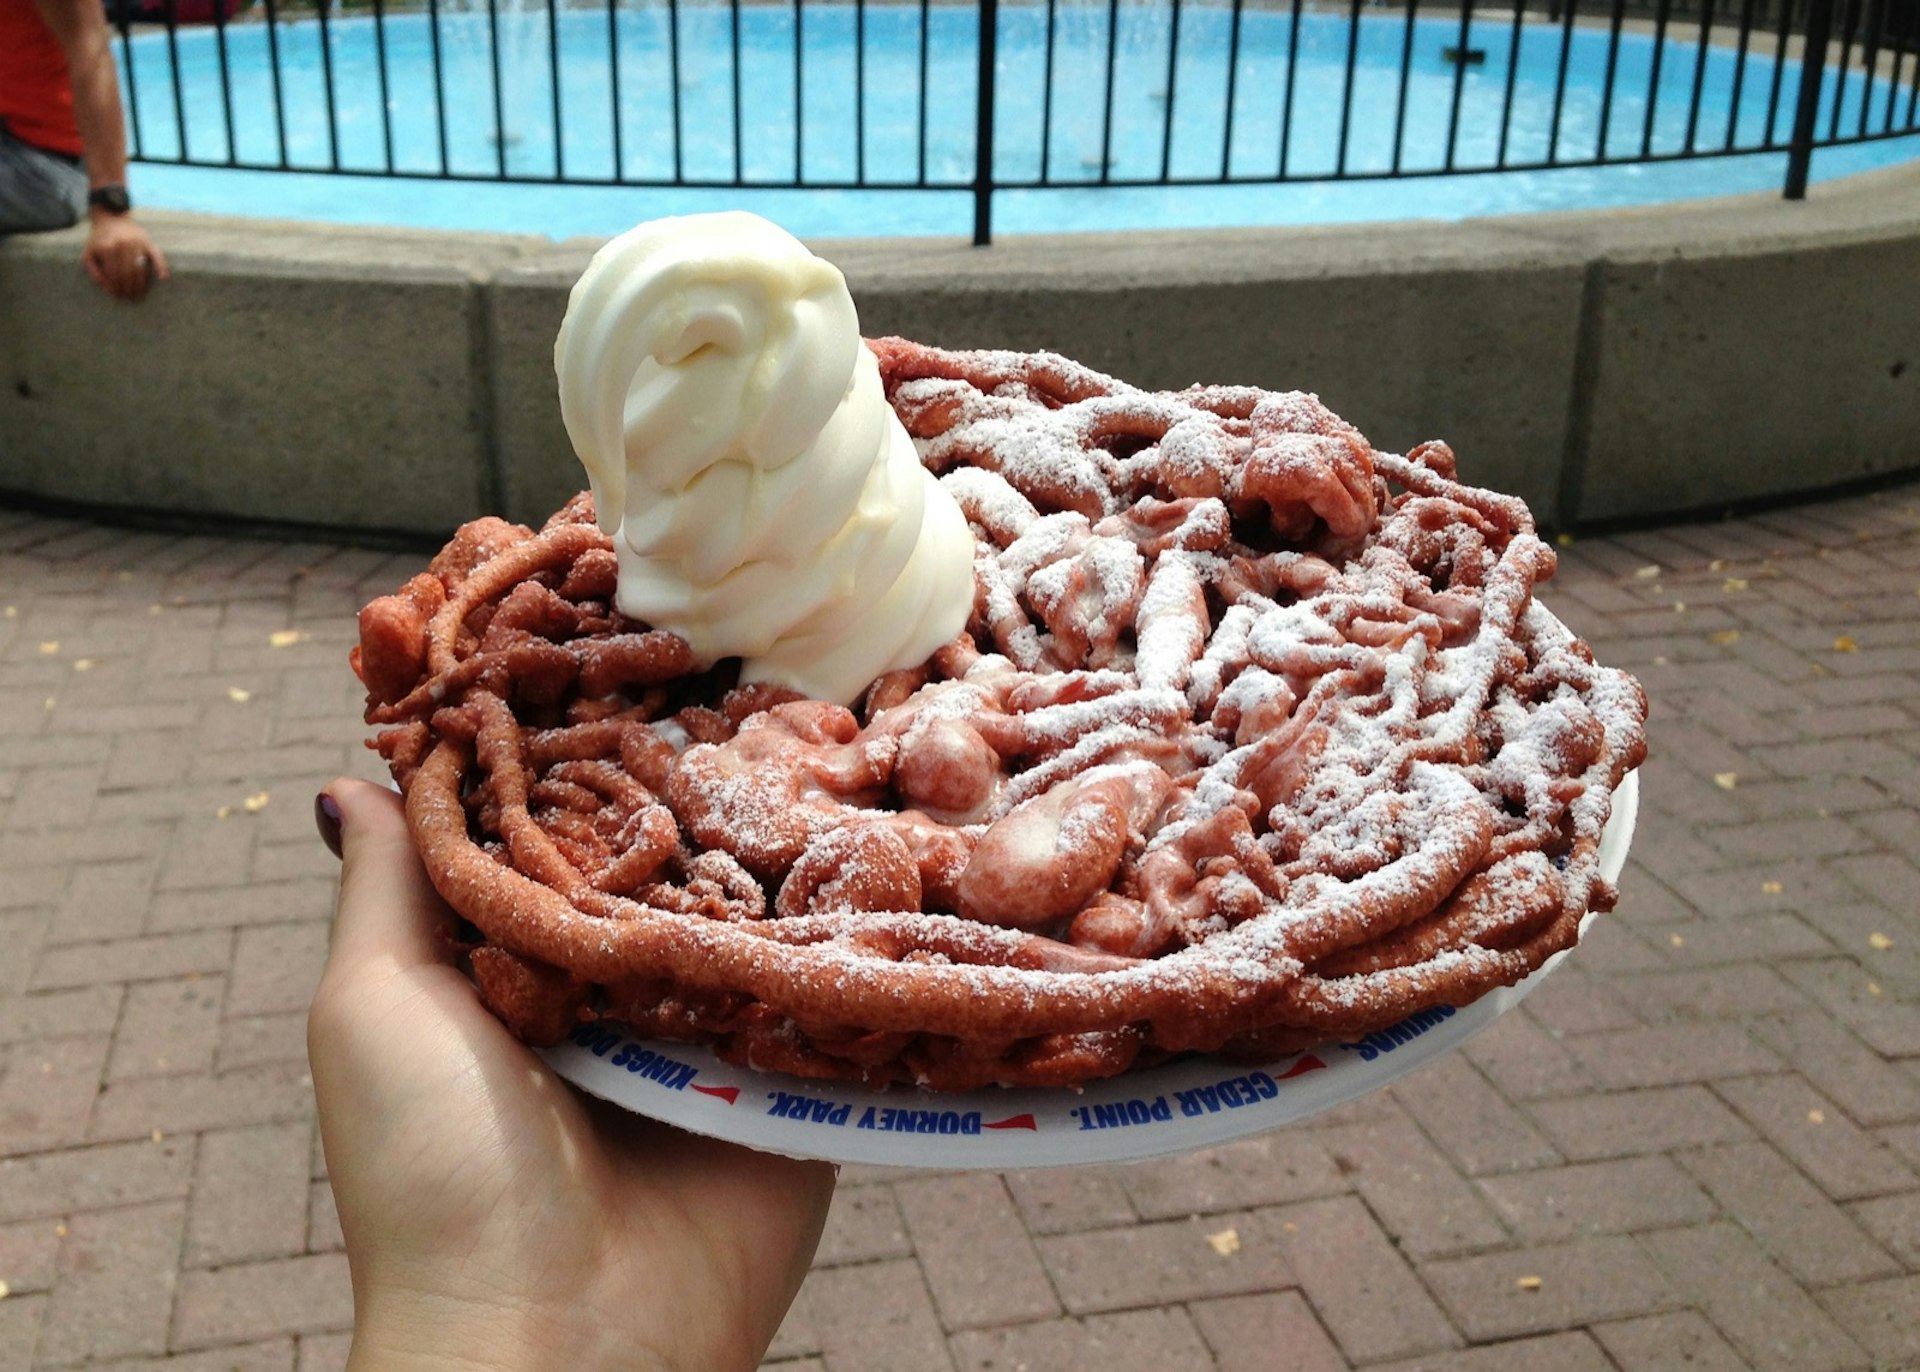 A hand holds out a funnel cake, cooked to a deep brown, with a dollop of soft-serve ice cream on top of it.